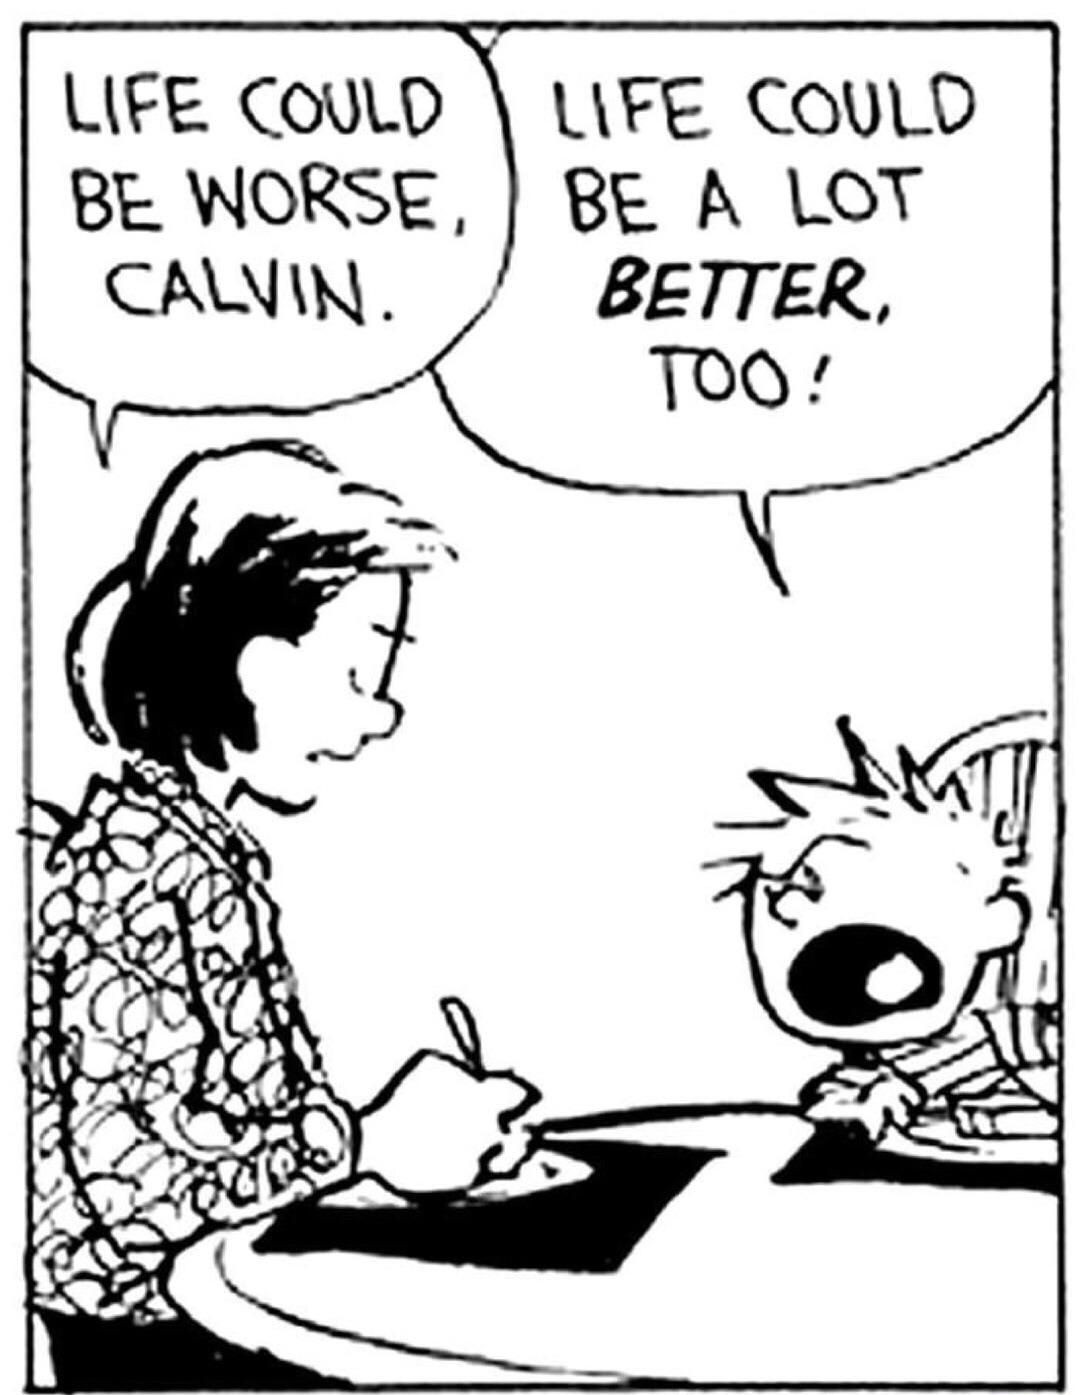 Calvin relates to me too much